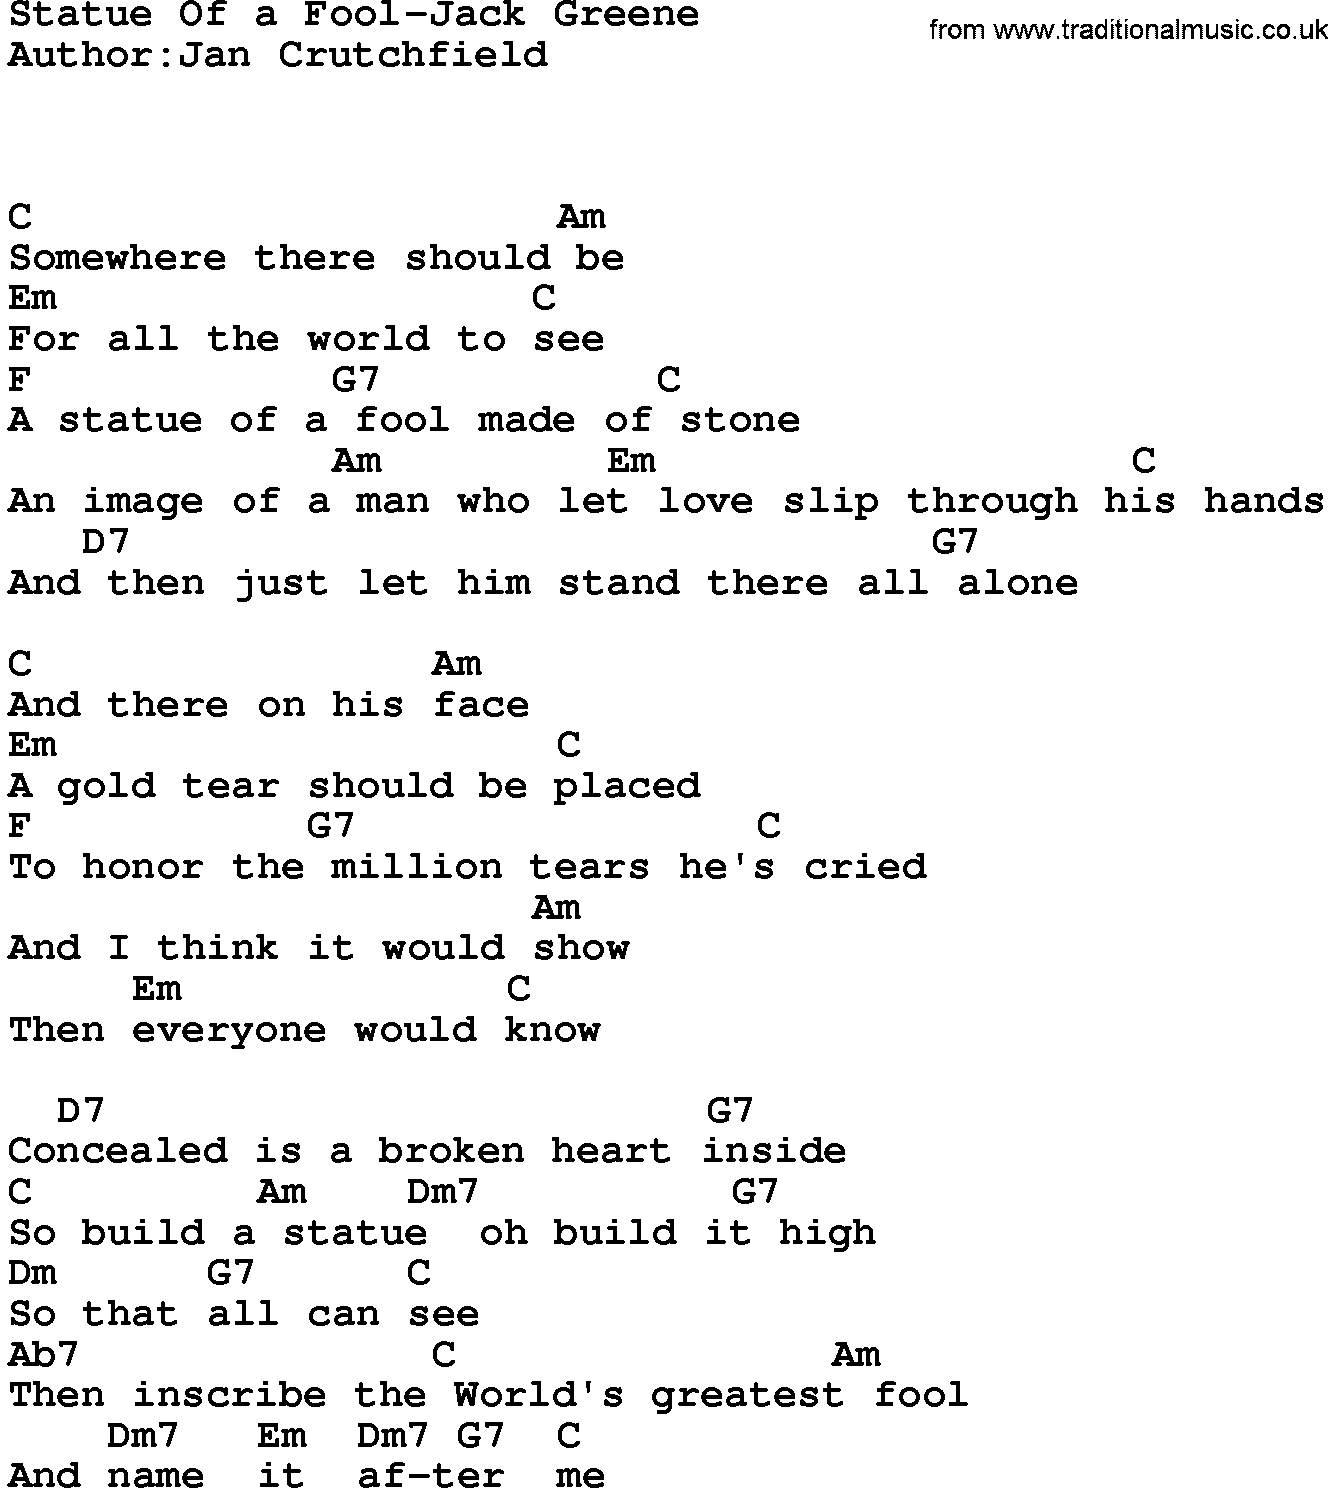 Country music song: Statue Of A Fool-Jack Greene lyrics and chords